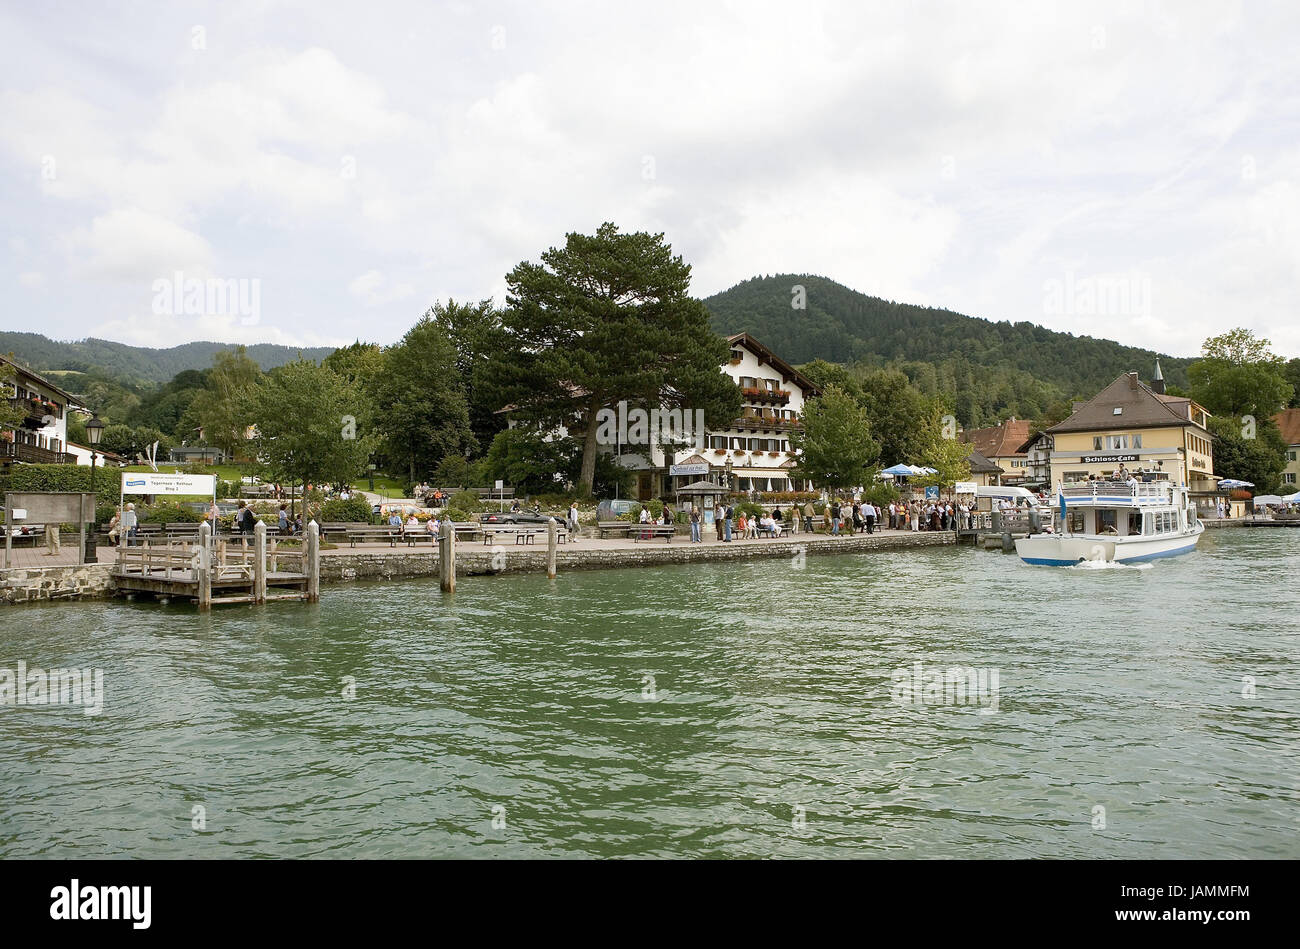 Germany,Upper Bavaria,Tegernsee,landing stage,excursion boat,tourist,no model release,Bavarians,place,health resort,resort,jetty,lake,residential house,farmhouse,inn,lock cafe,cafe,gastronomy,destination,excursion,boat,tourism,person, Stock Photo